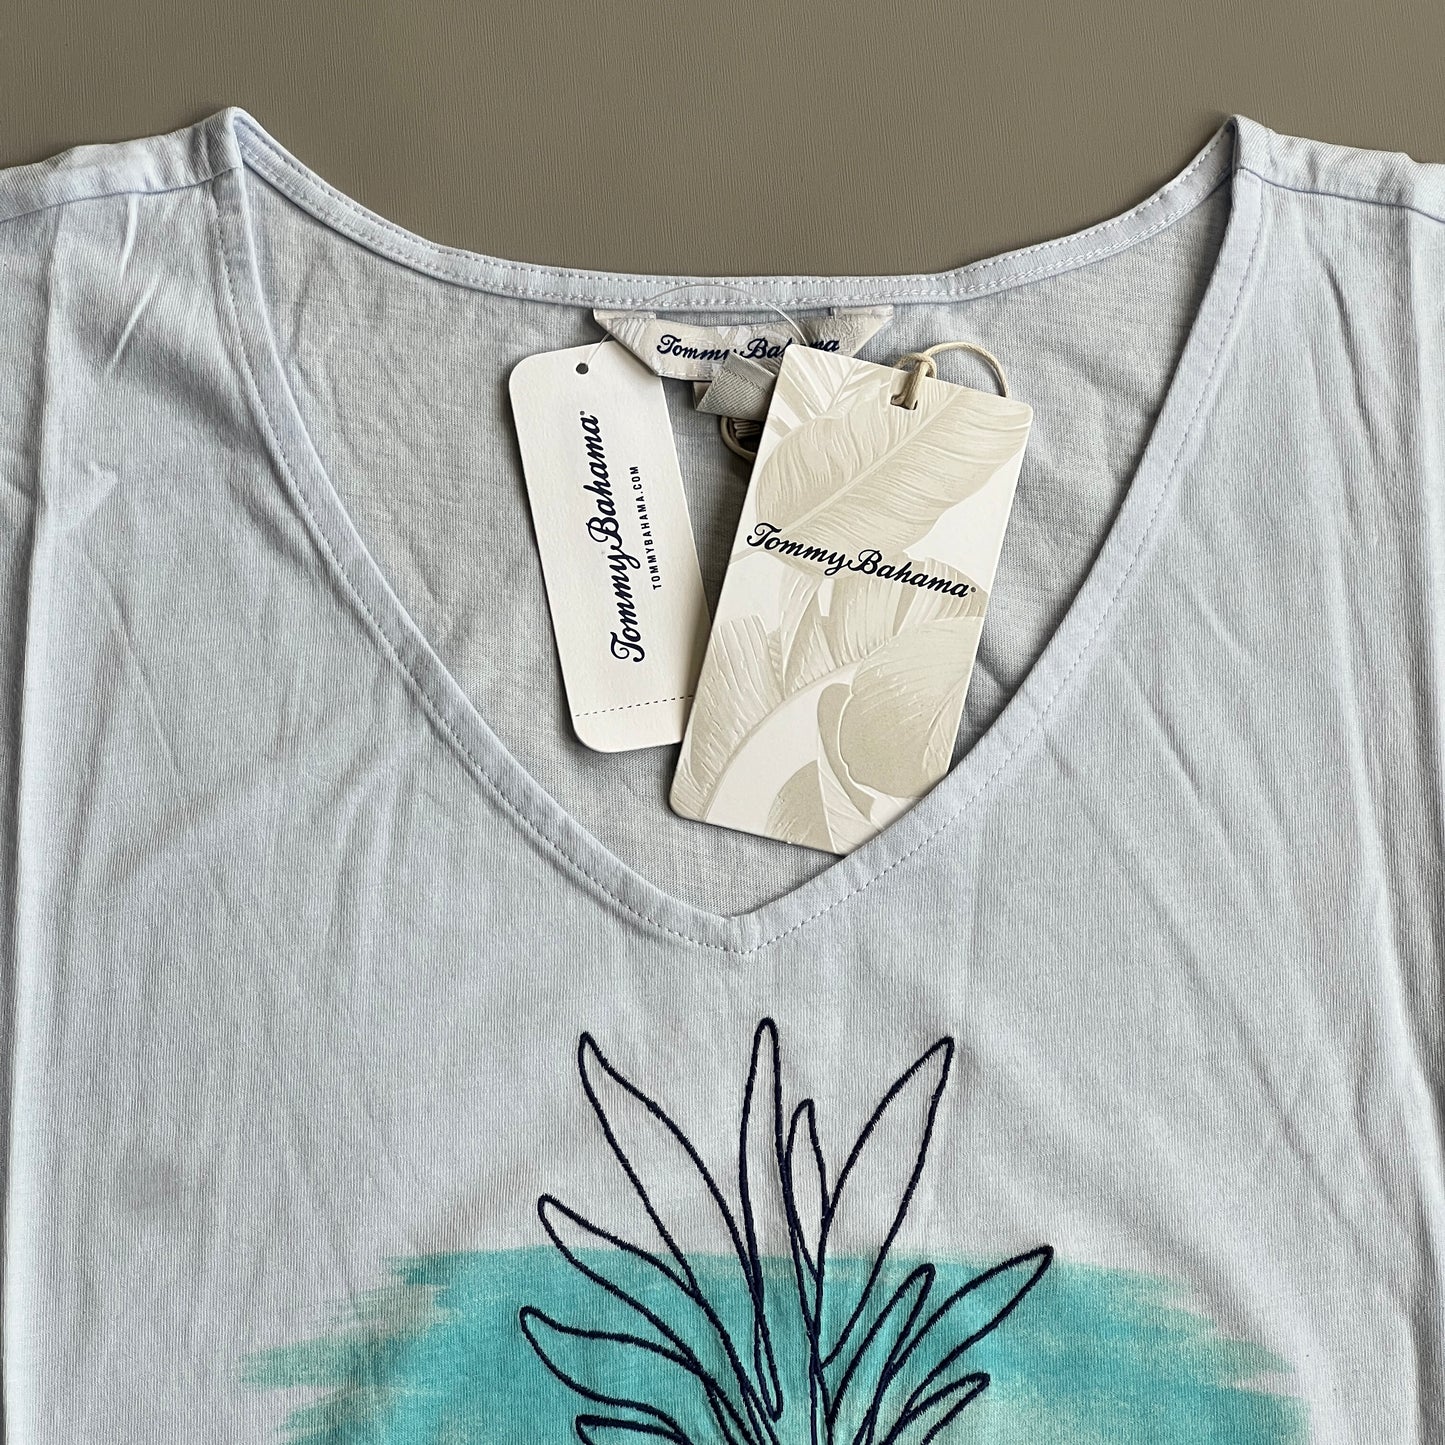 TOMMY BAHAMA Women's Seaport Painted Pineapple Tee T-shirt Dew Drop Size S (New)